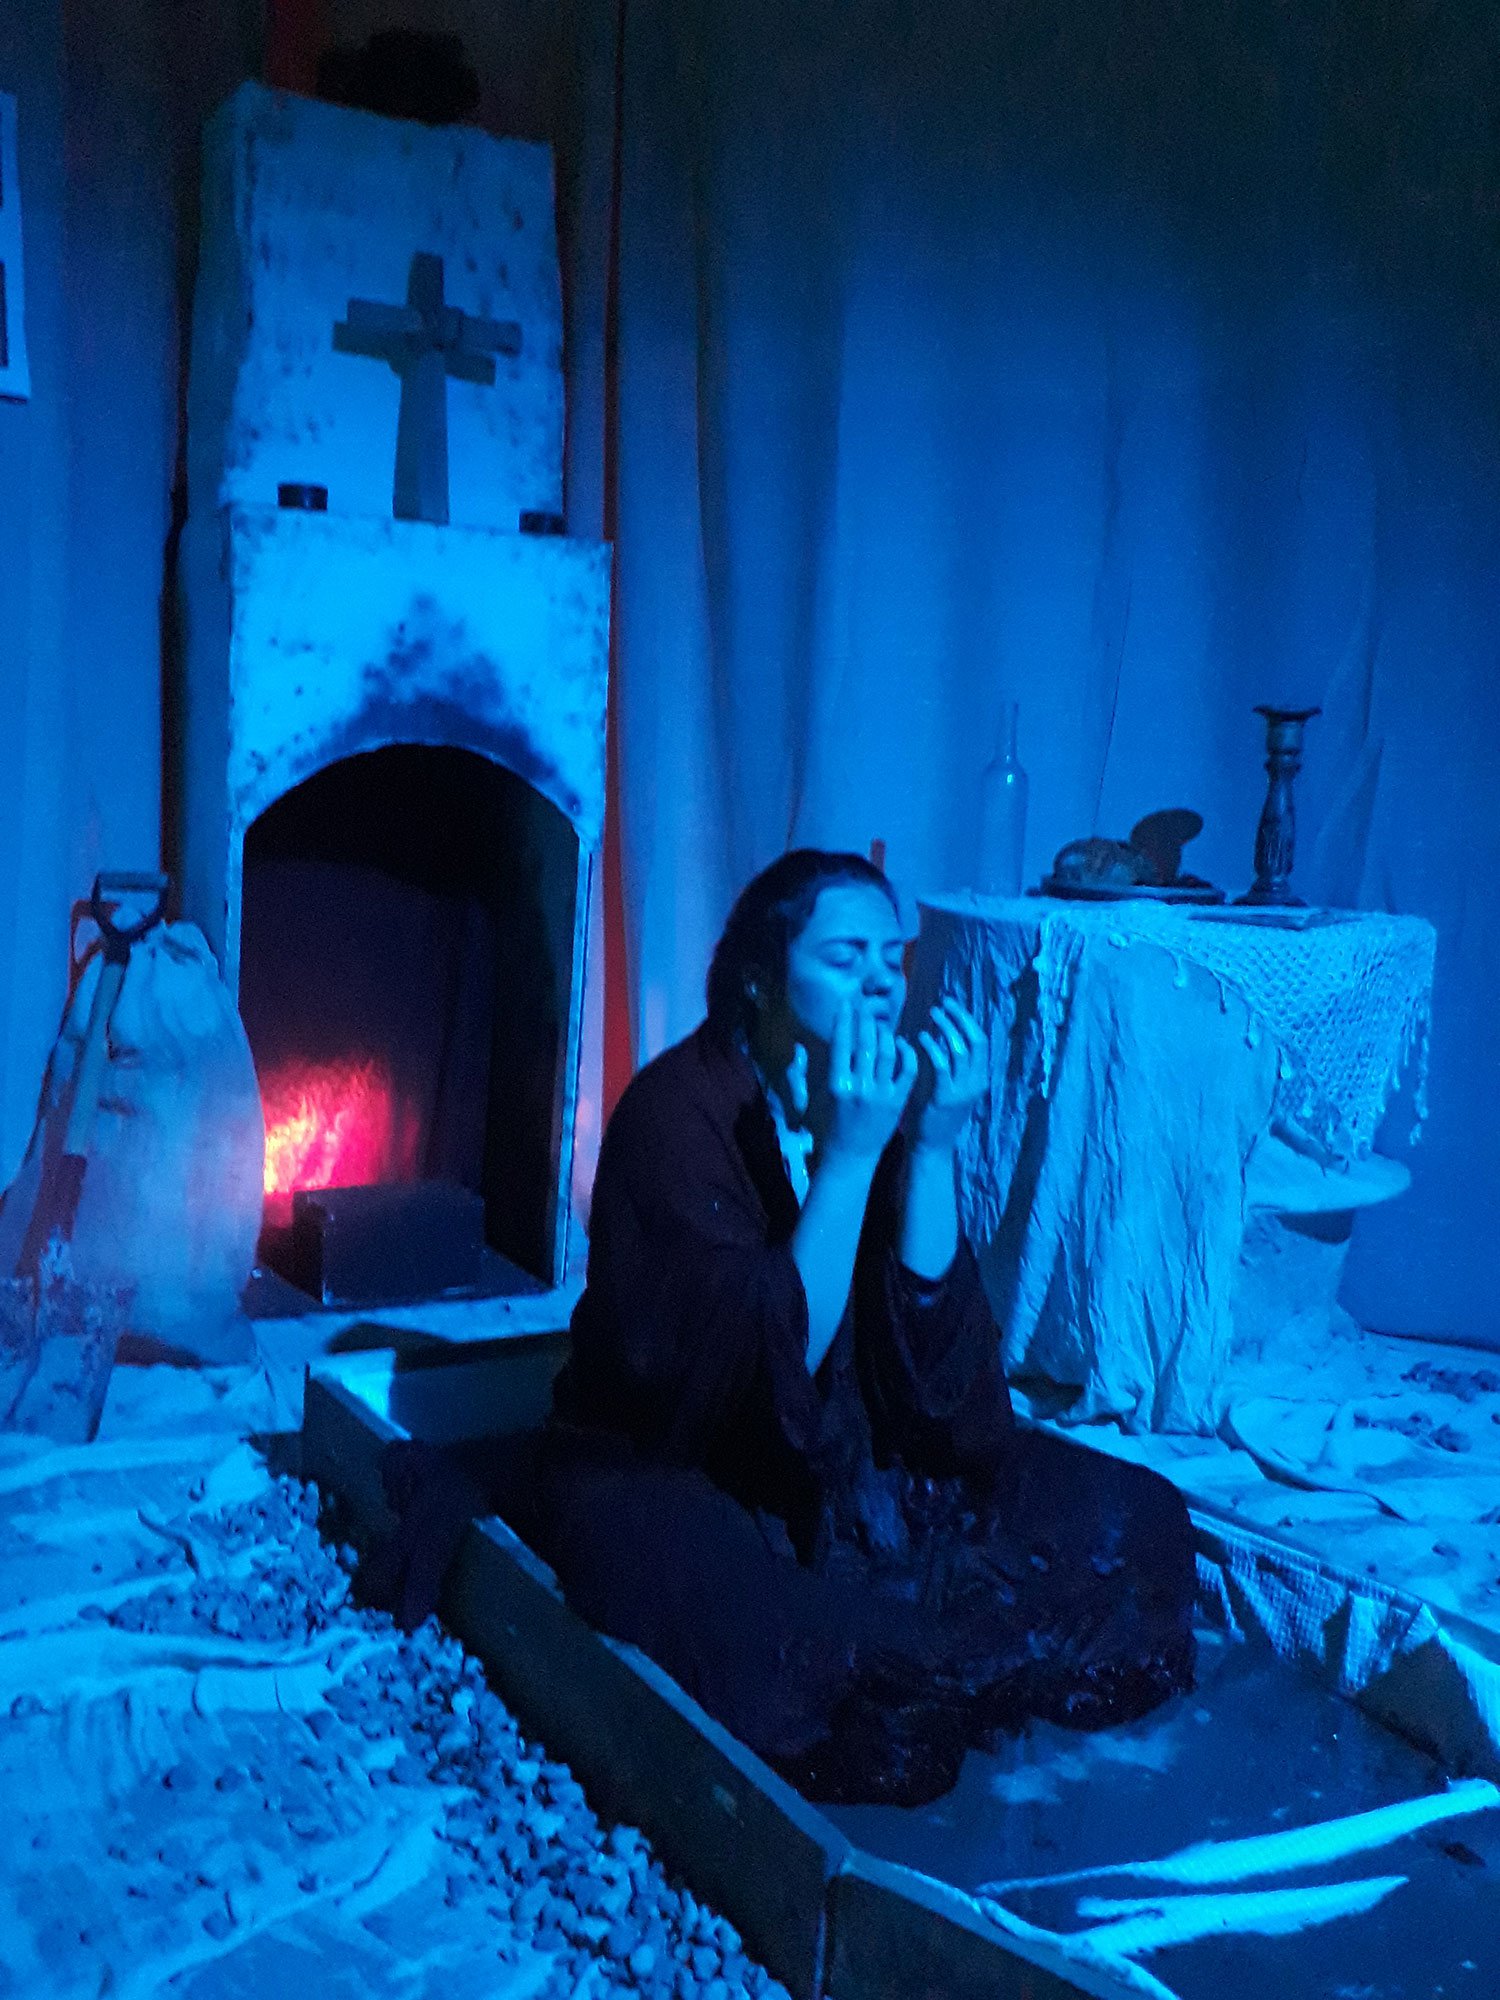 An actor is stooped in prayer, in a boat-There's a fireplace and crucifix behind her